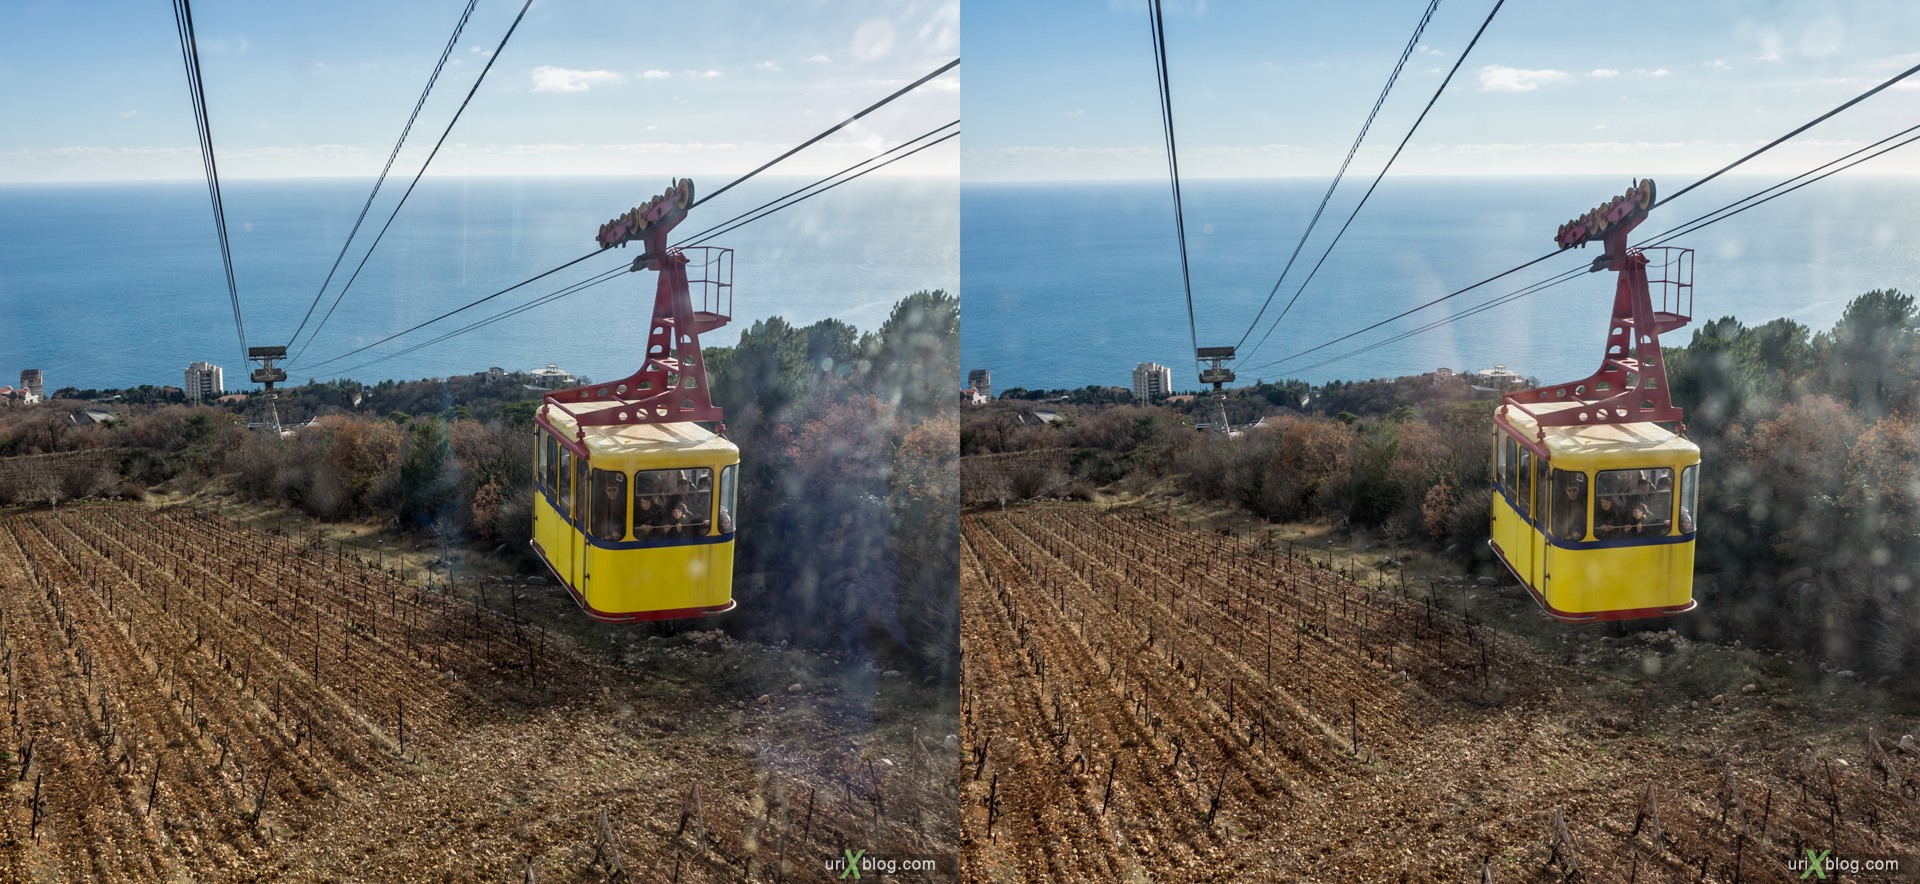 2012, Ai-Petri, mountains, Crimea, Russia, Ukraine, cableway, winter, 3D, stereo pair, cross-eyed, crossview, cross view stereo pair, stereoscopic